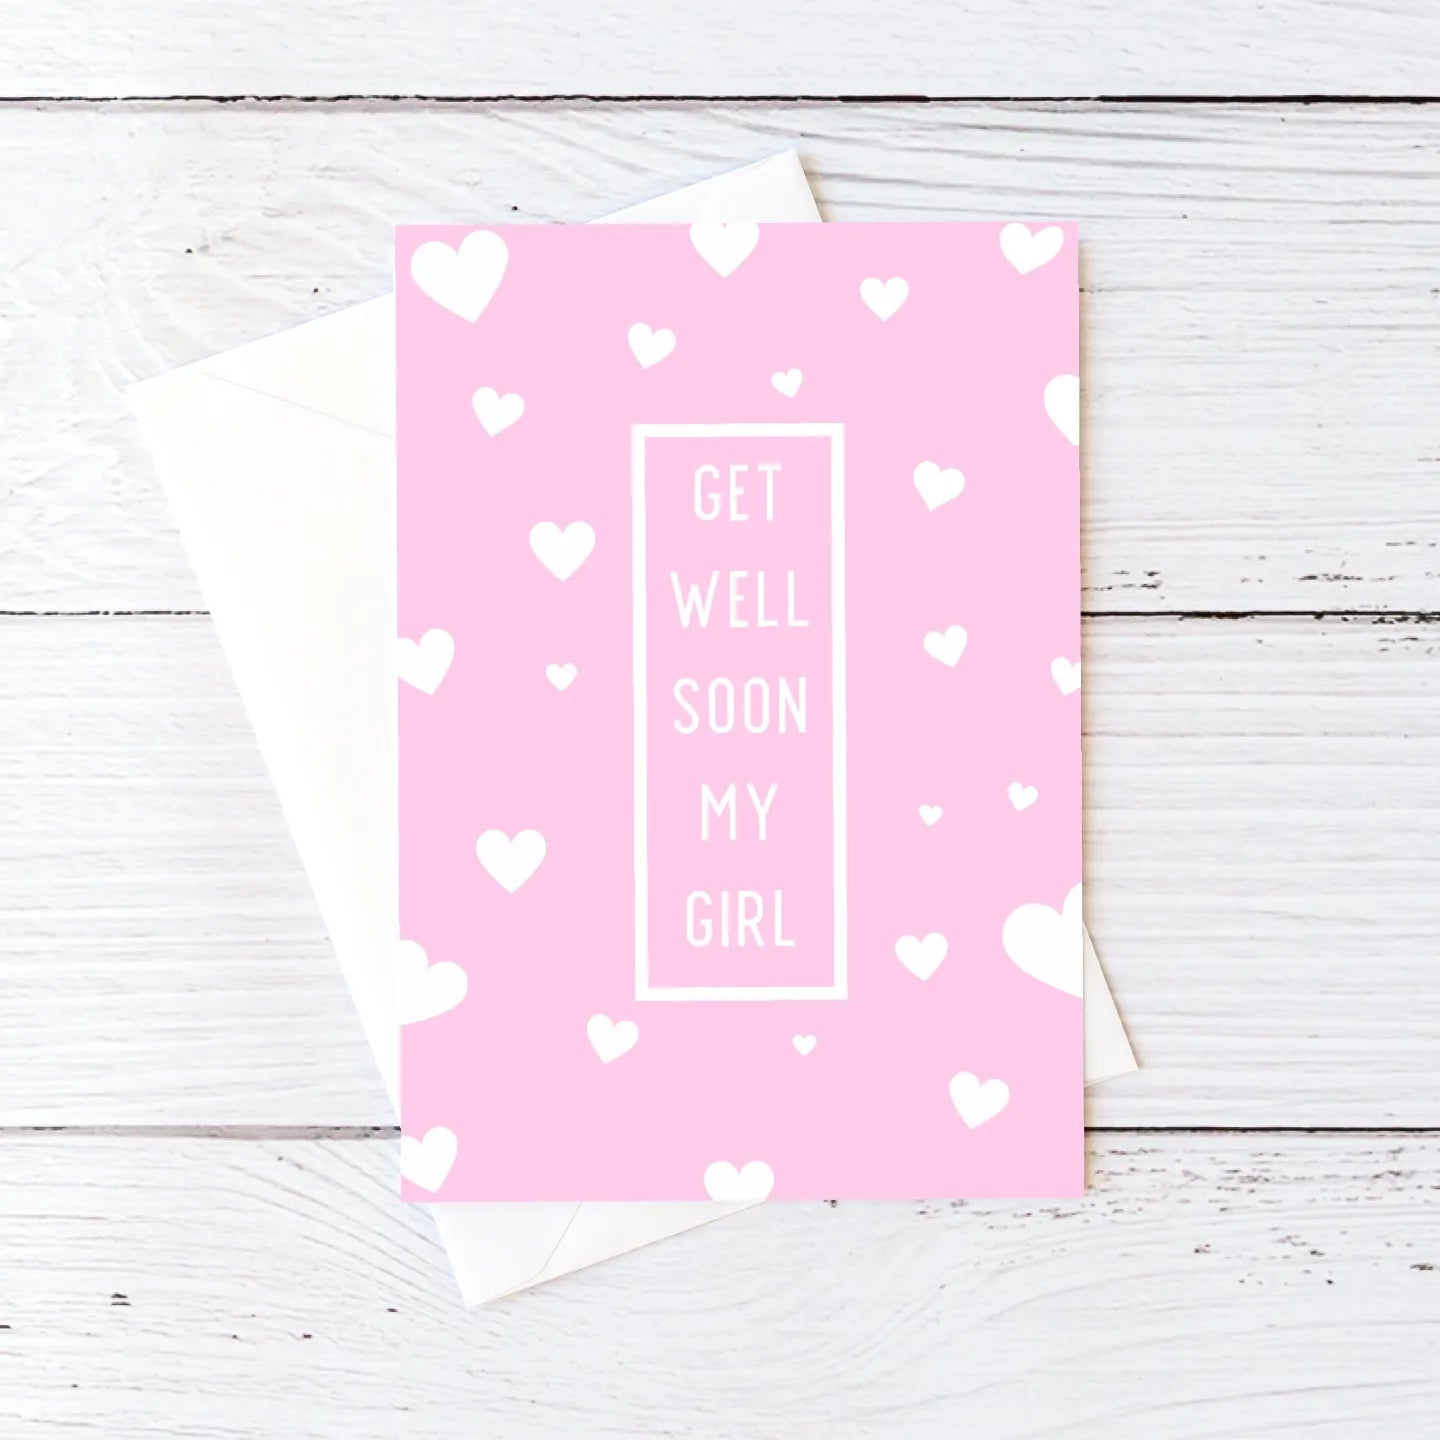 Get Well Soon Card | Get Well Soon, My Girl | Thinking Of You Card